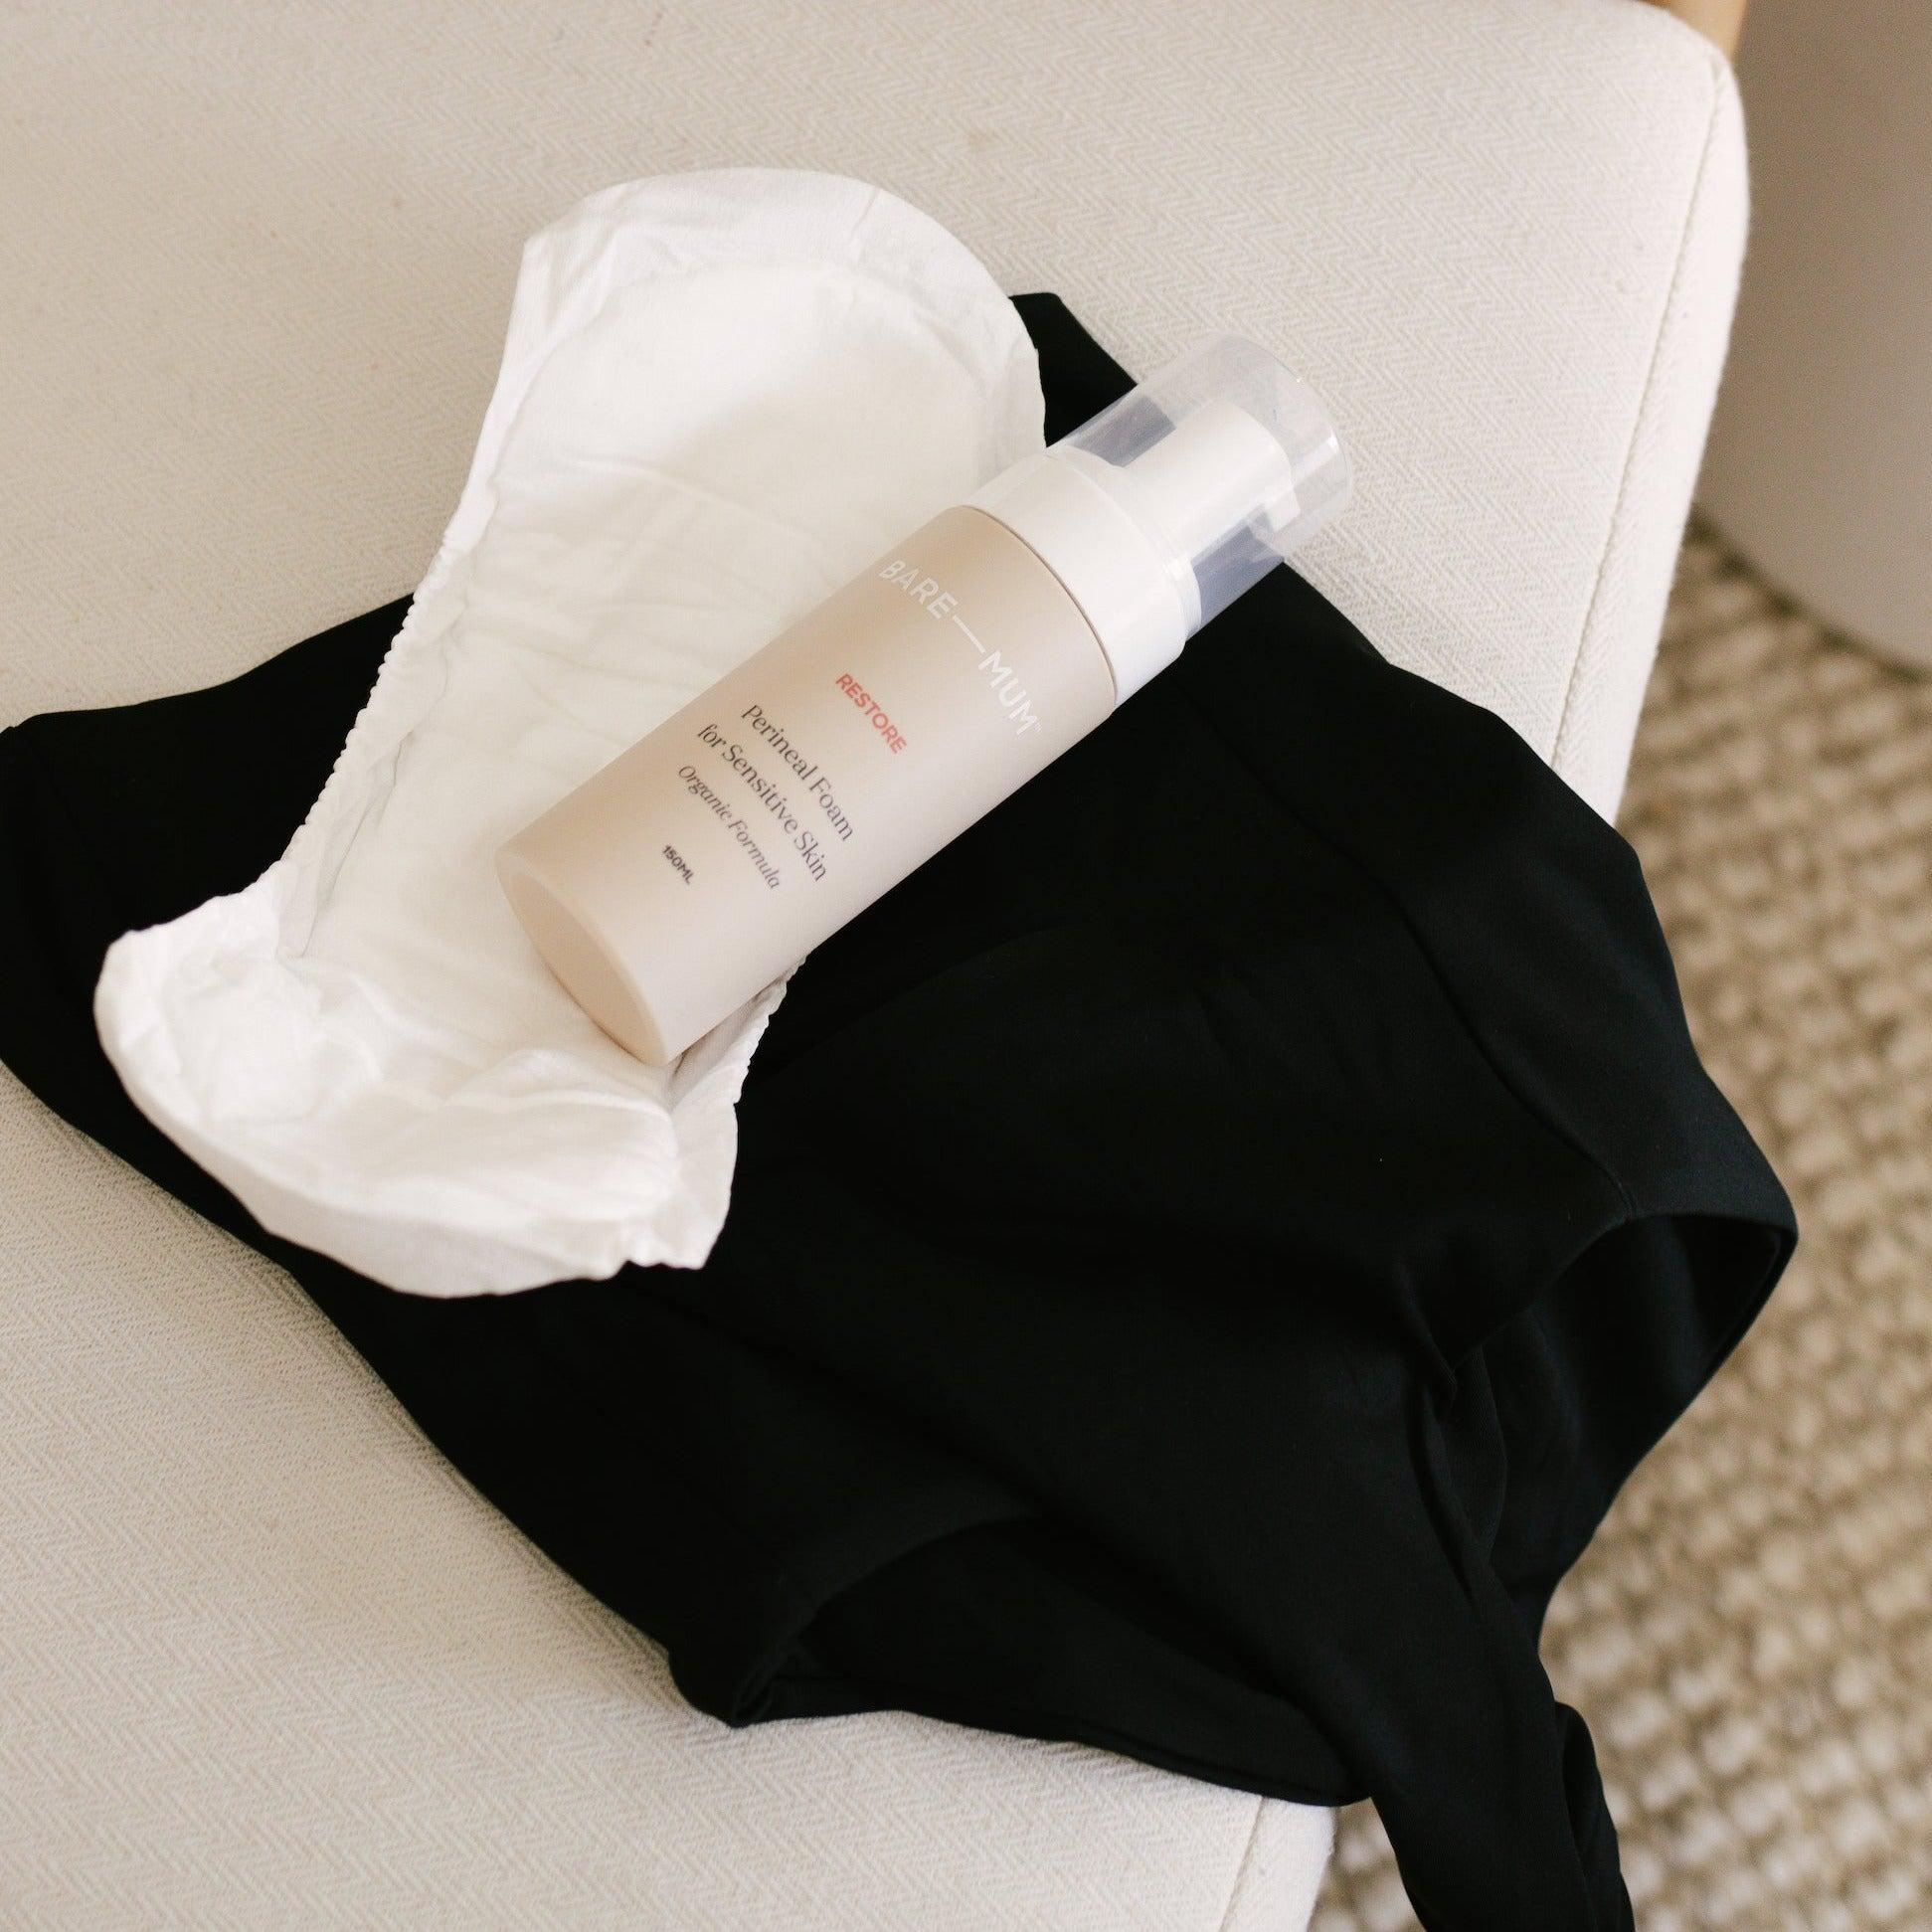 A pair of Postpartum Briefs by Bare Mum assisting in a mother's recovery after birth, carefully placed on top of a white couch.